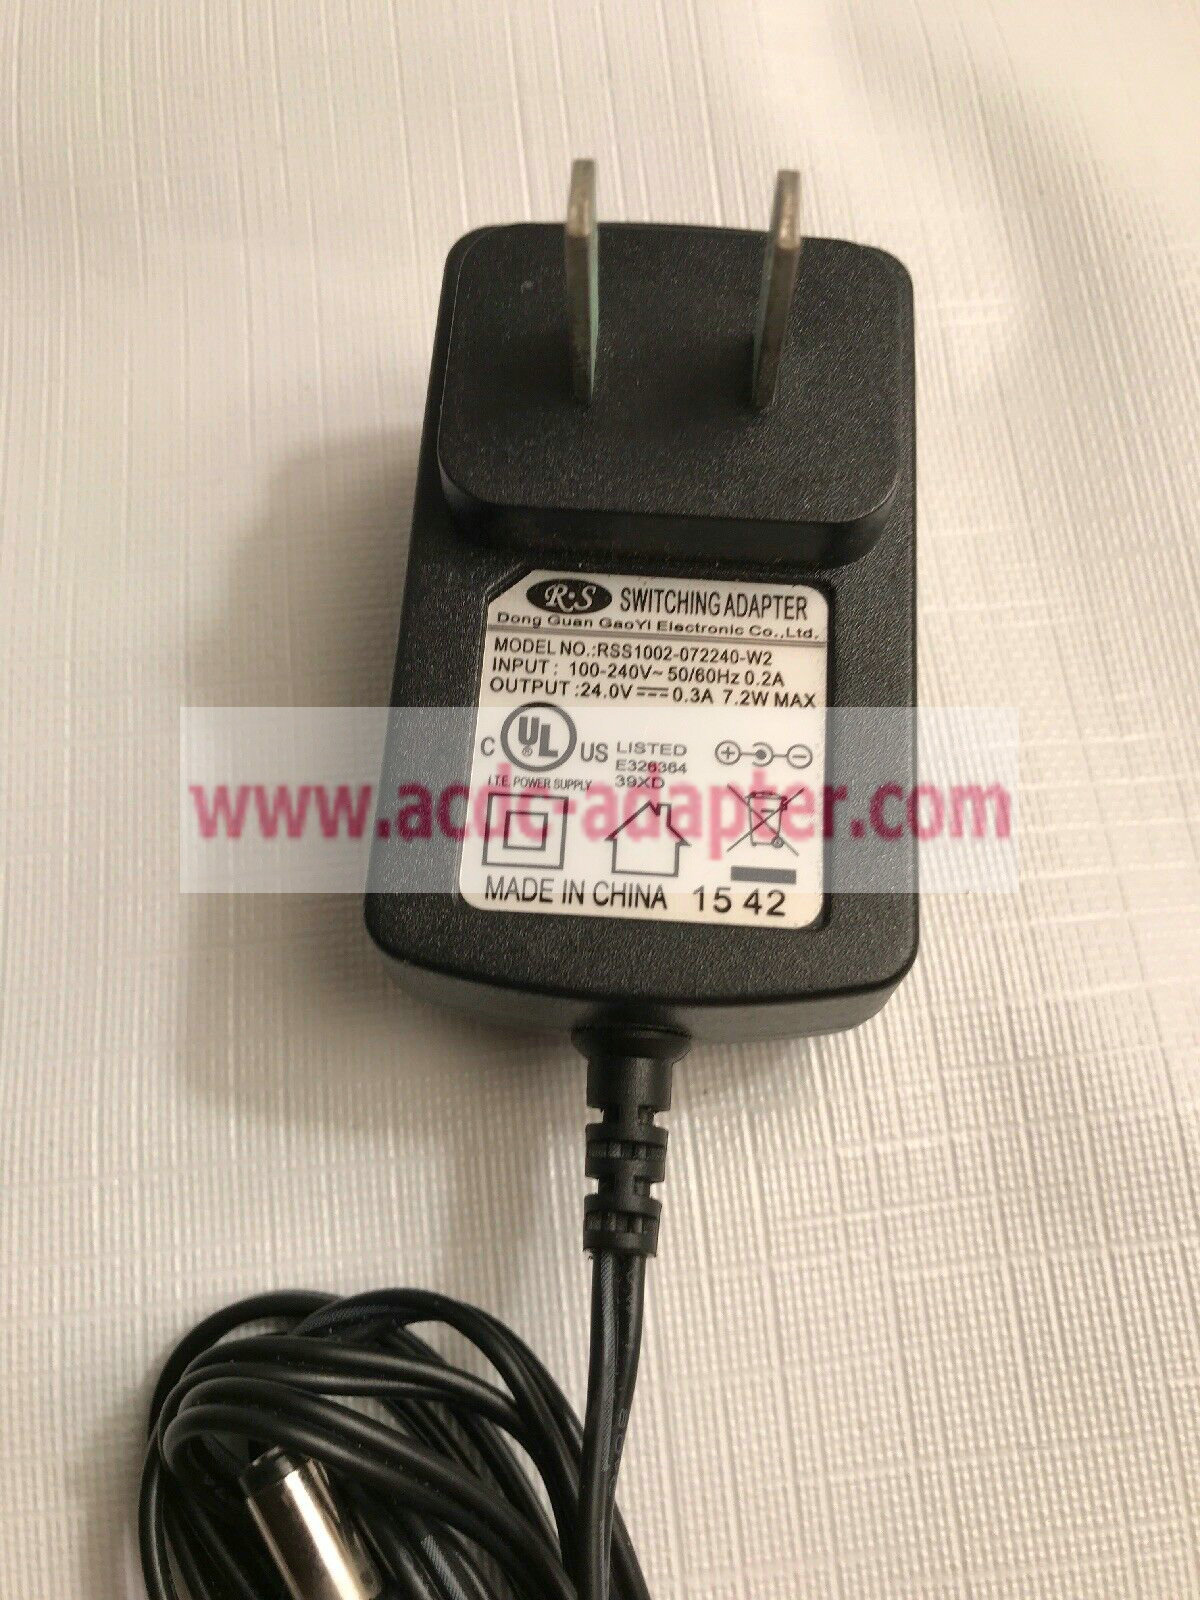 NEW AC Adapter Charger R-S RSS1002-072240-W2 24VDC 0.3A Power supply